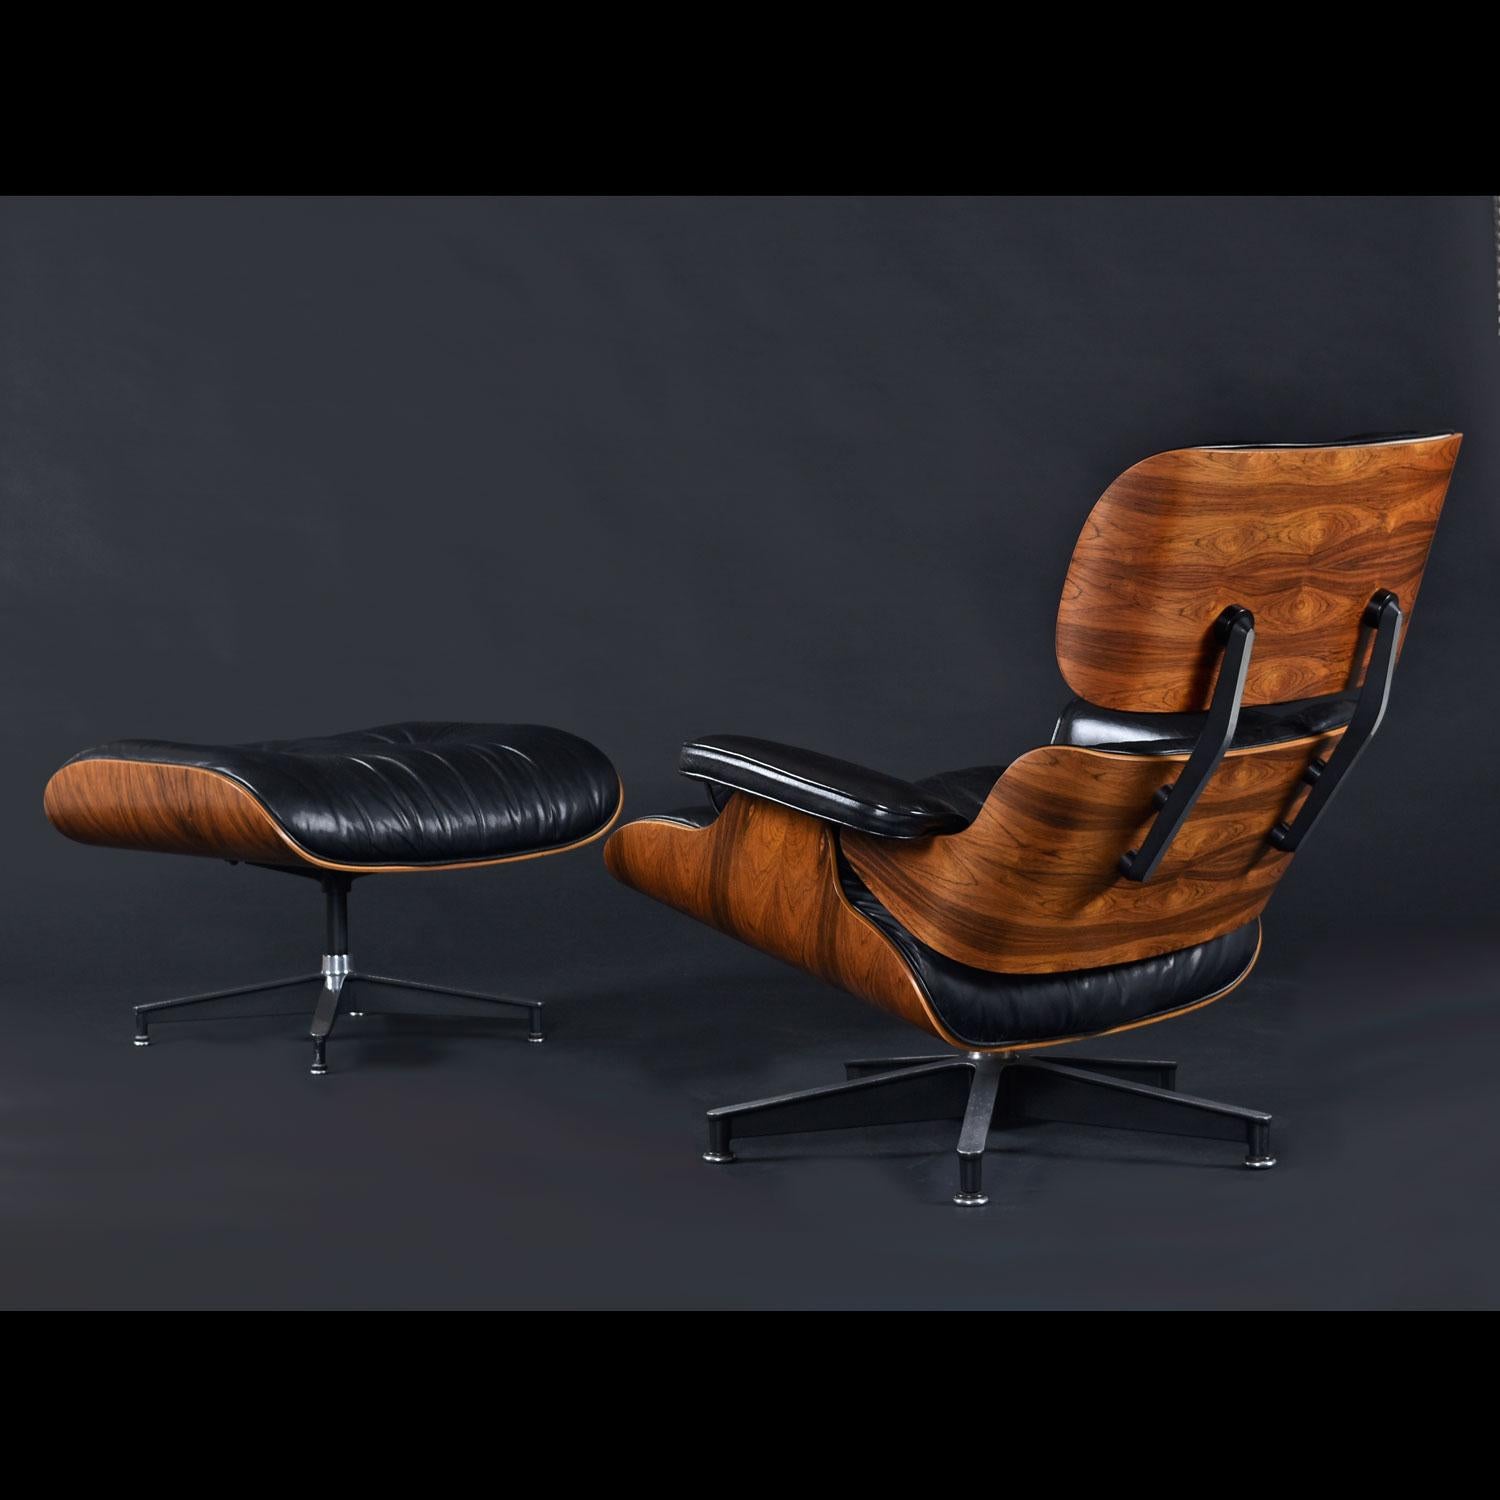 100% Original, right down to the base glides. Born on Oct 17, 1977, this pair has remained in its original glory for 45 years. This classic Eames recliner is available today in many wood finishes, however rosewood is no longer offered on new chairs